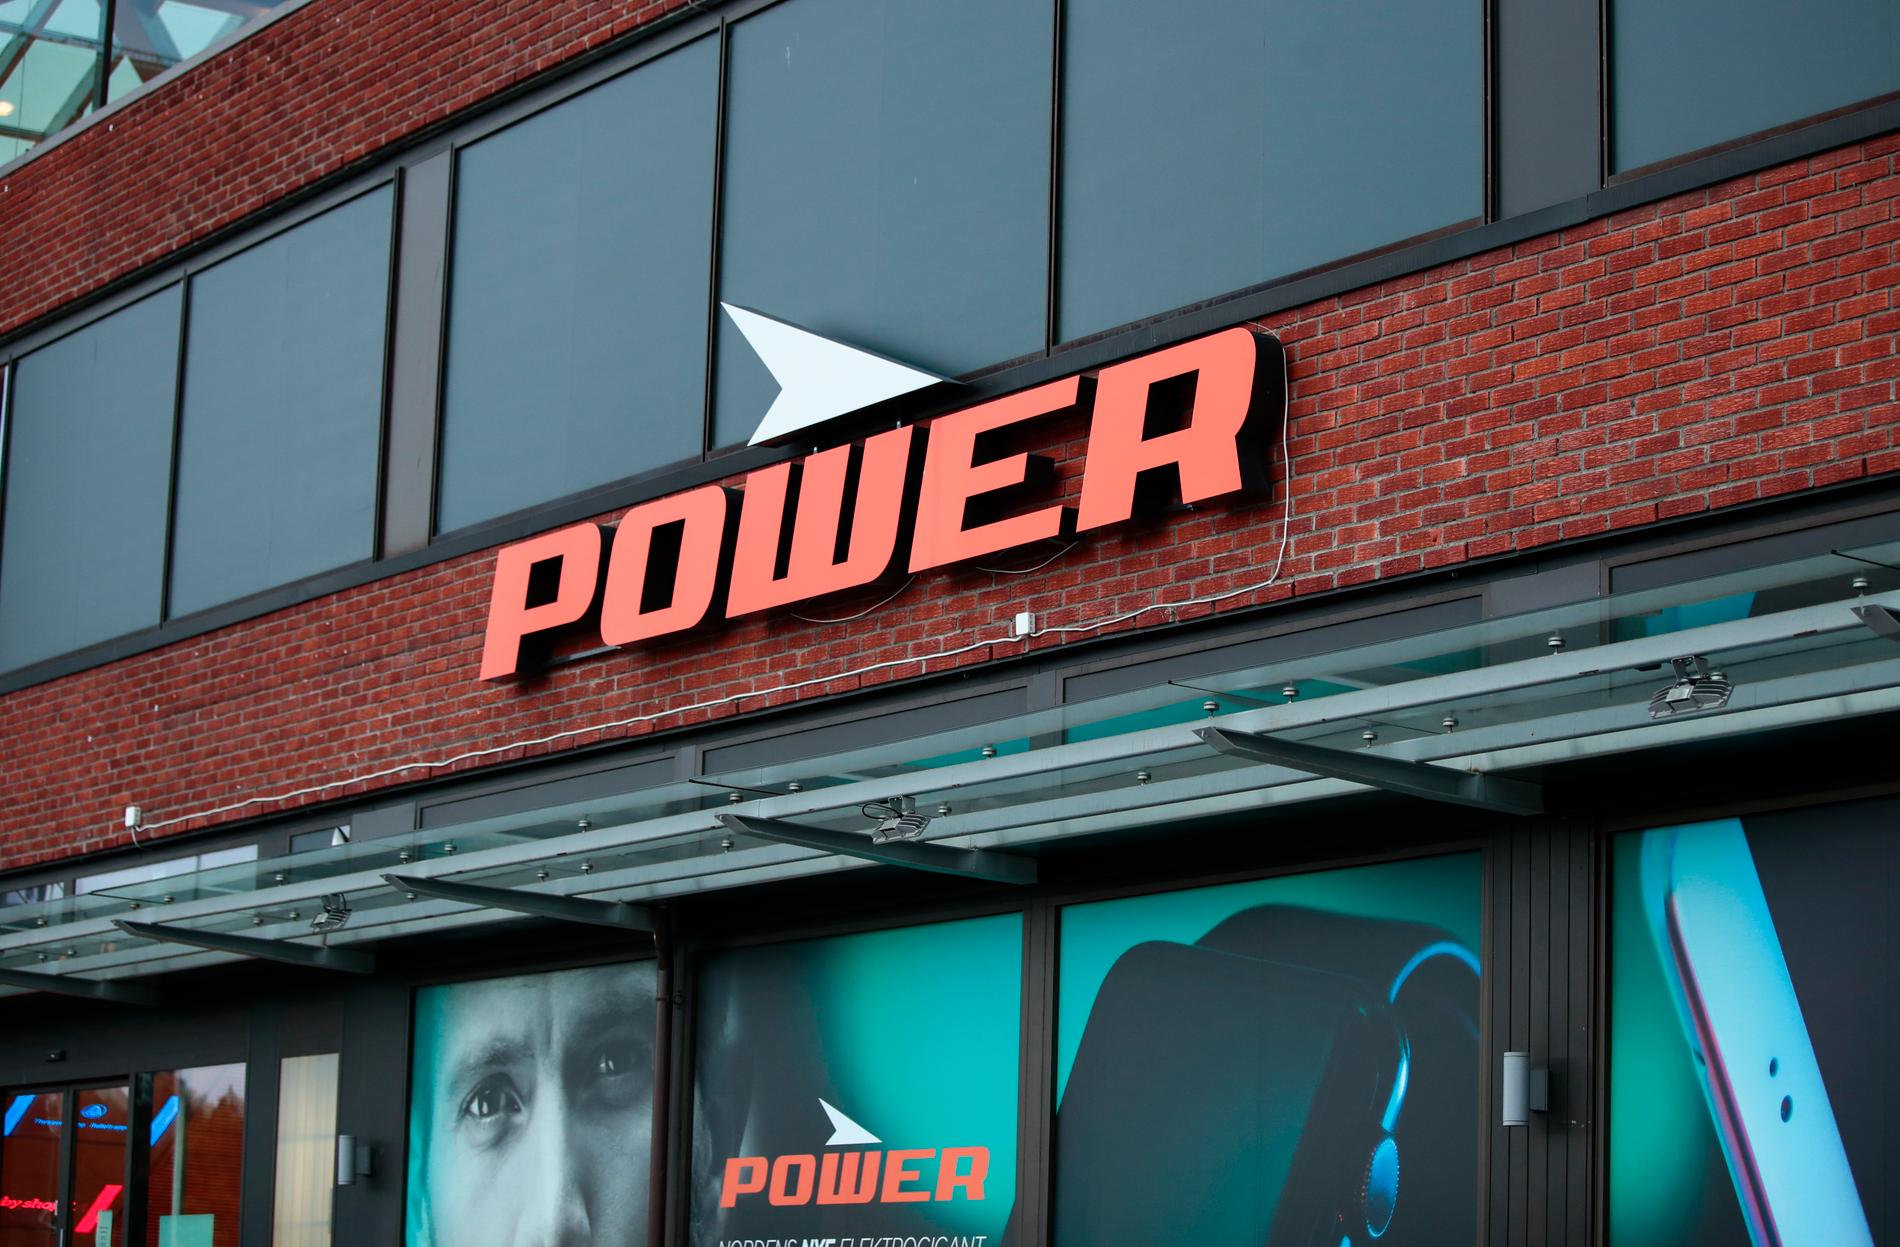 Employees at Power Jessheim Allegedly Forced to Work Unpaid Evening Events and Courses